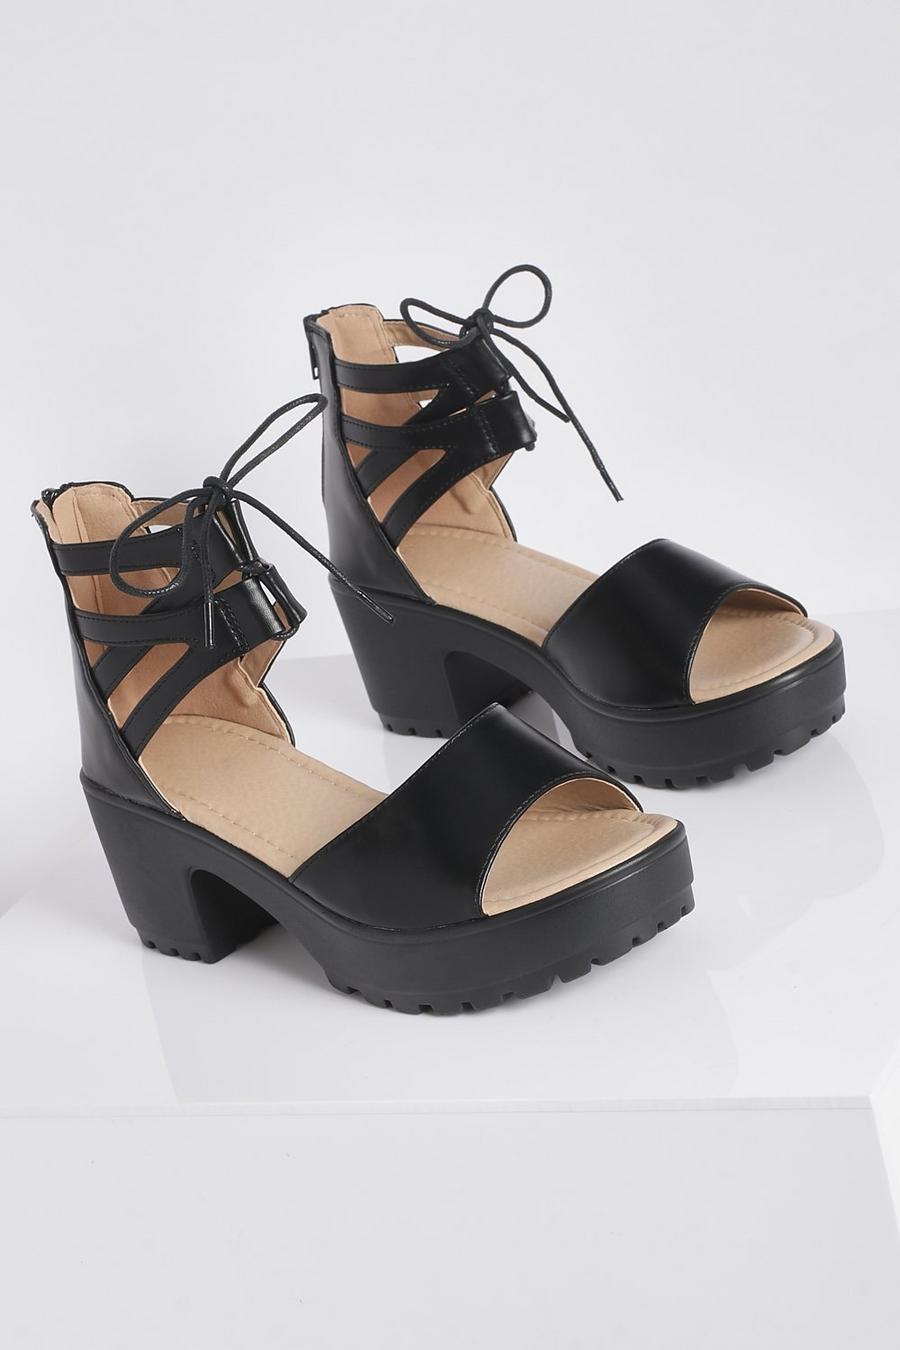 Black Lace Up 2 Part Cleated Sandals